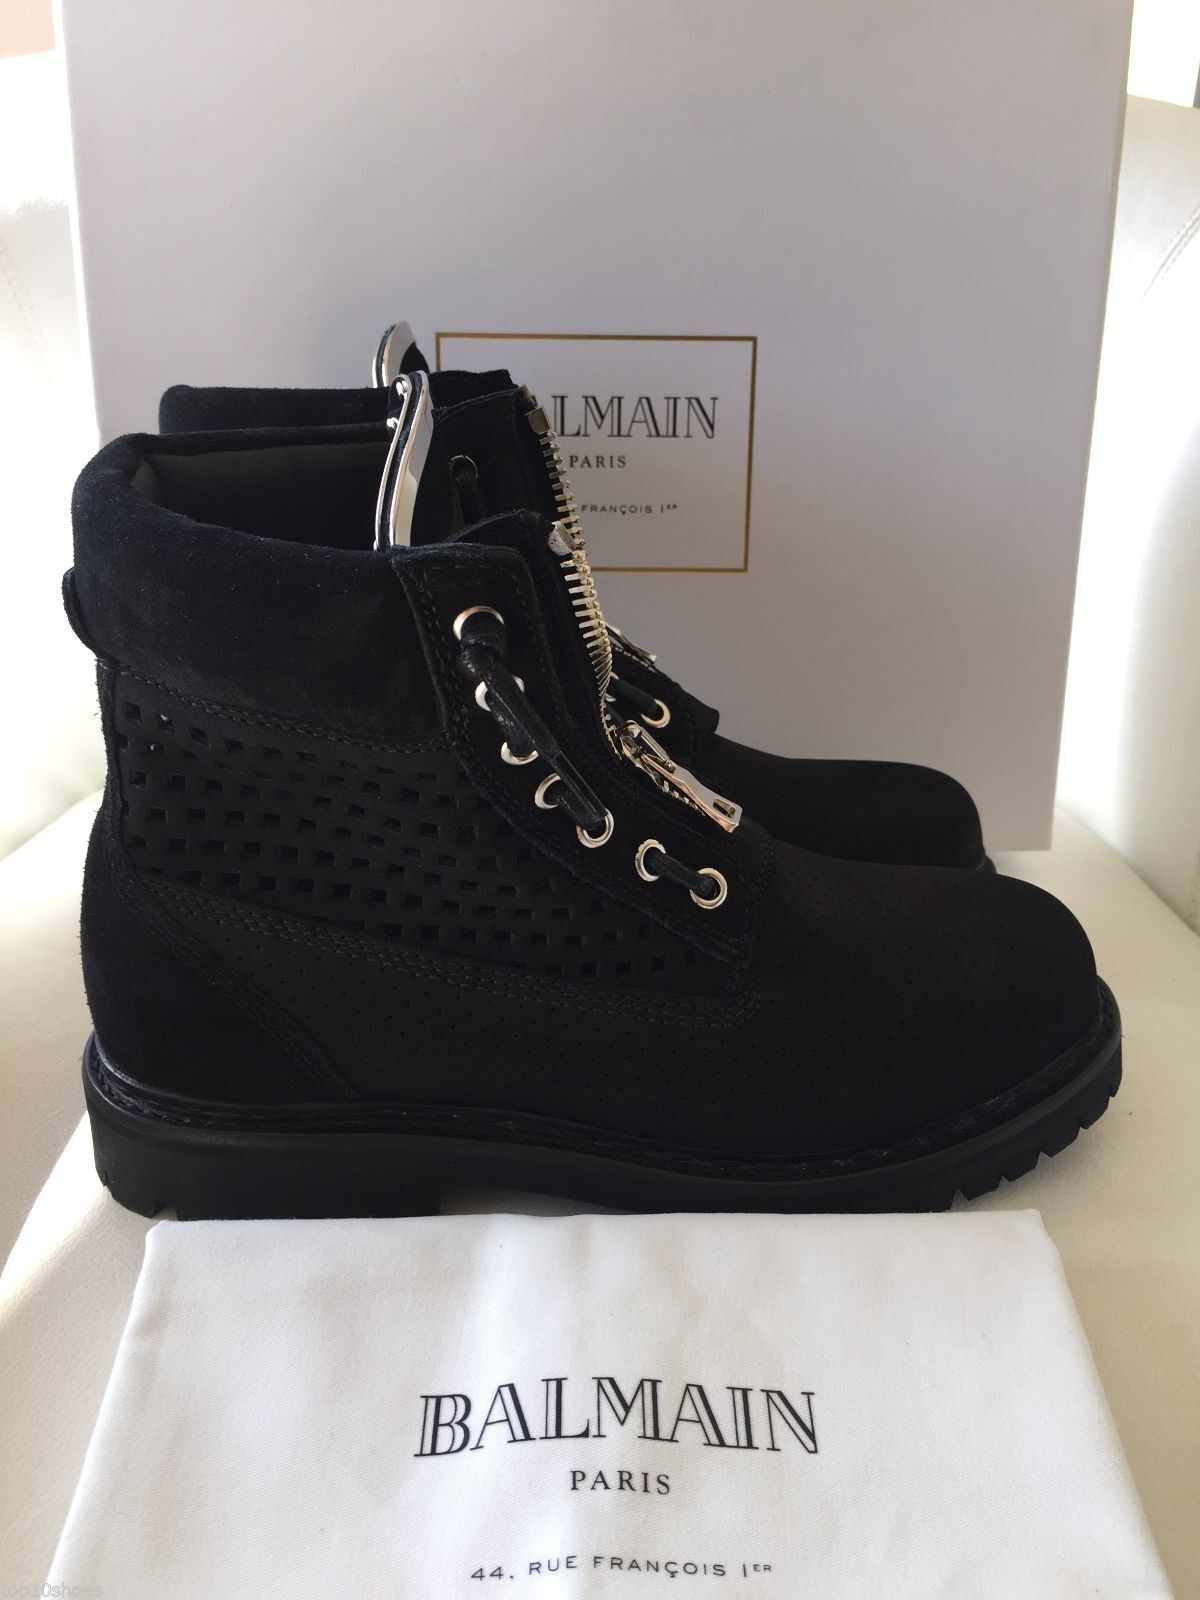 skjule tilpasningsevne Marty Fielding 2016 BALMAIN Sandals SHOSE Hollow Women Ankle Motorcycle Boots New Summer  Martin Shoes Woman Leather Flats Botas Femininas Sandals From  Diandianzhuan166, $130.66 | DHgate.Com